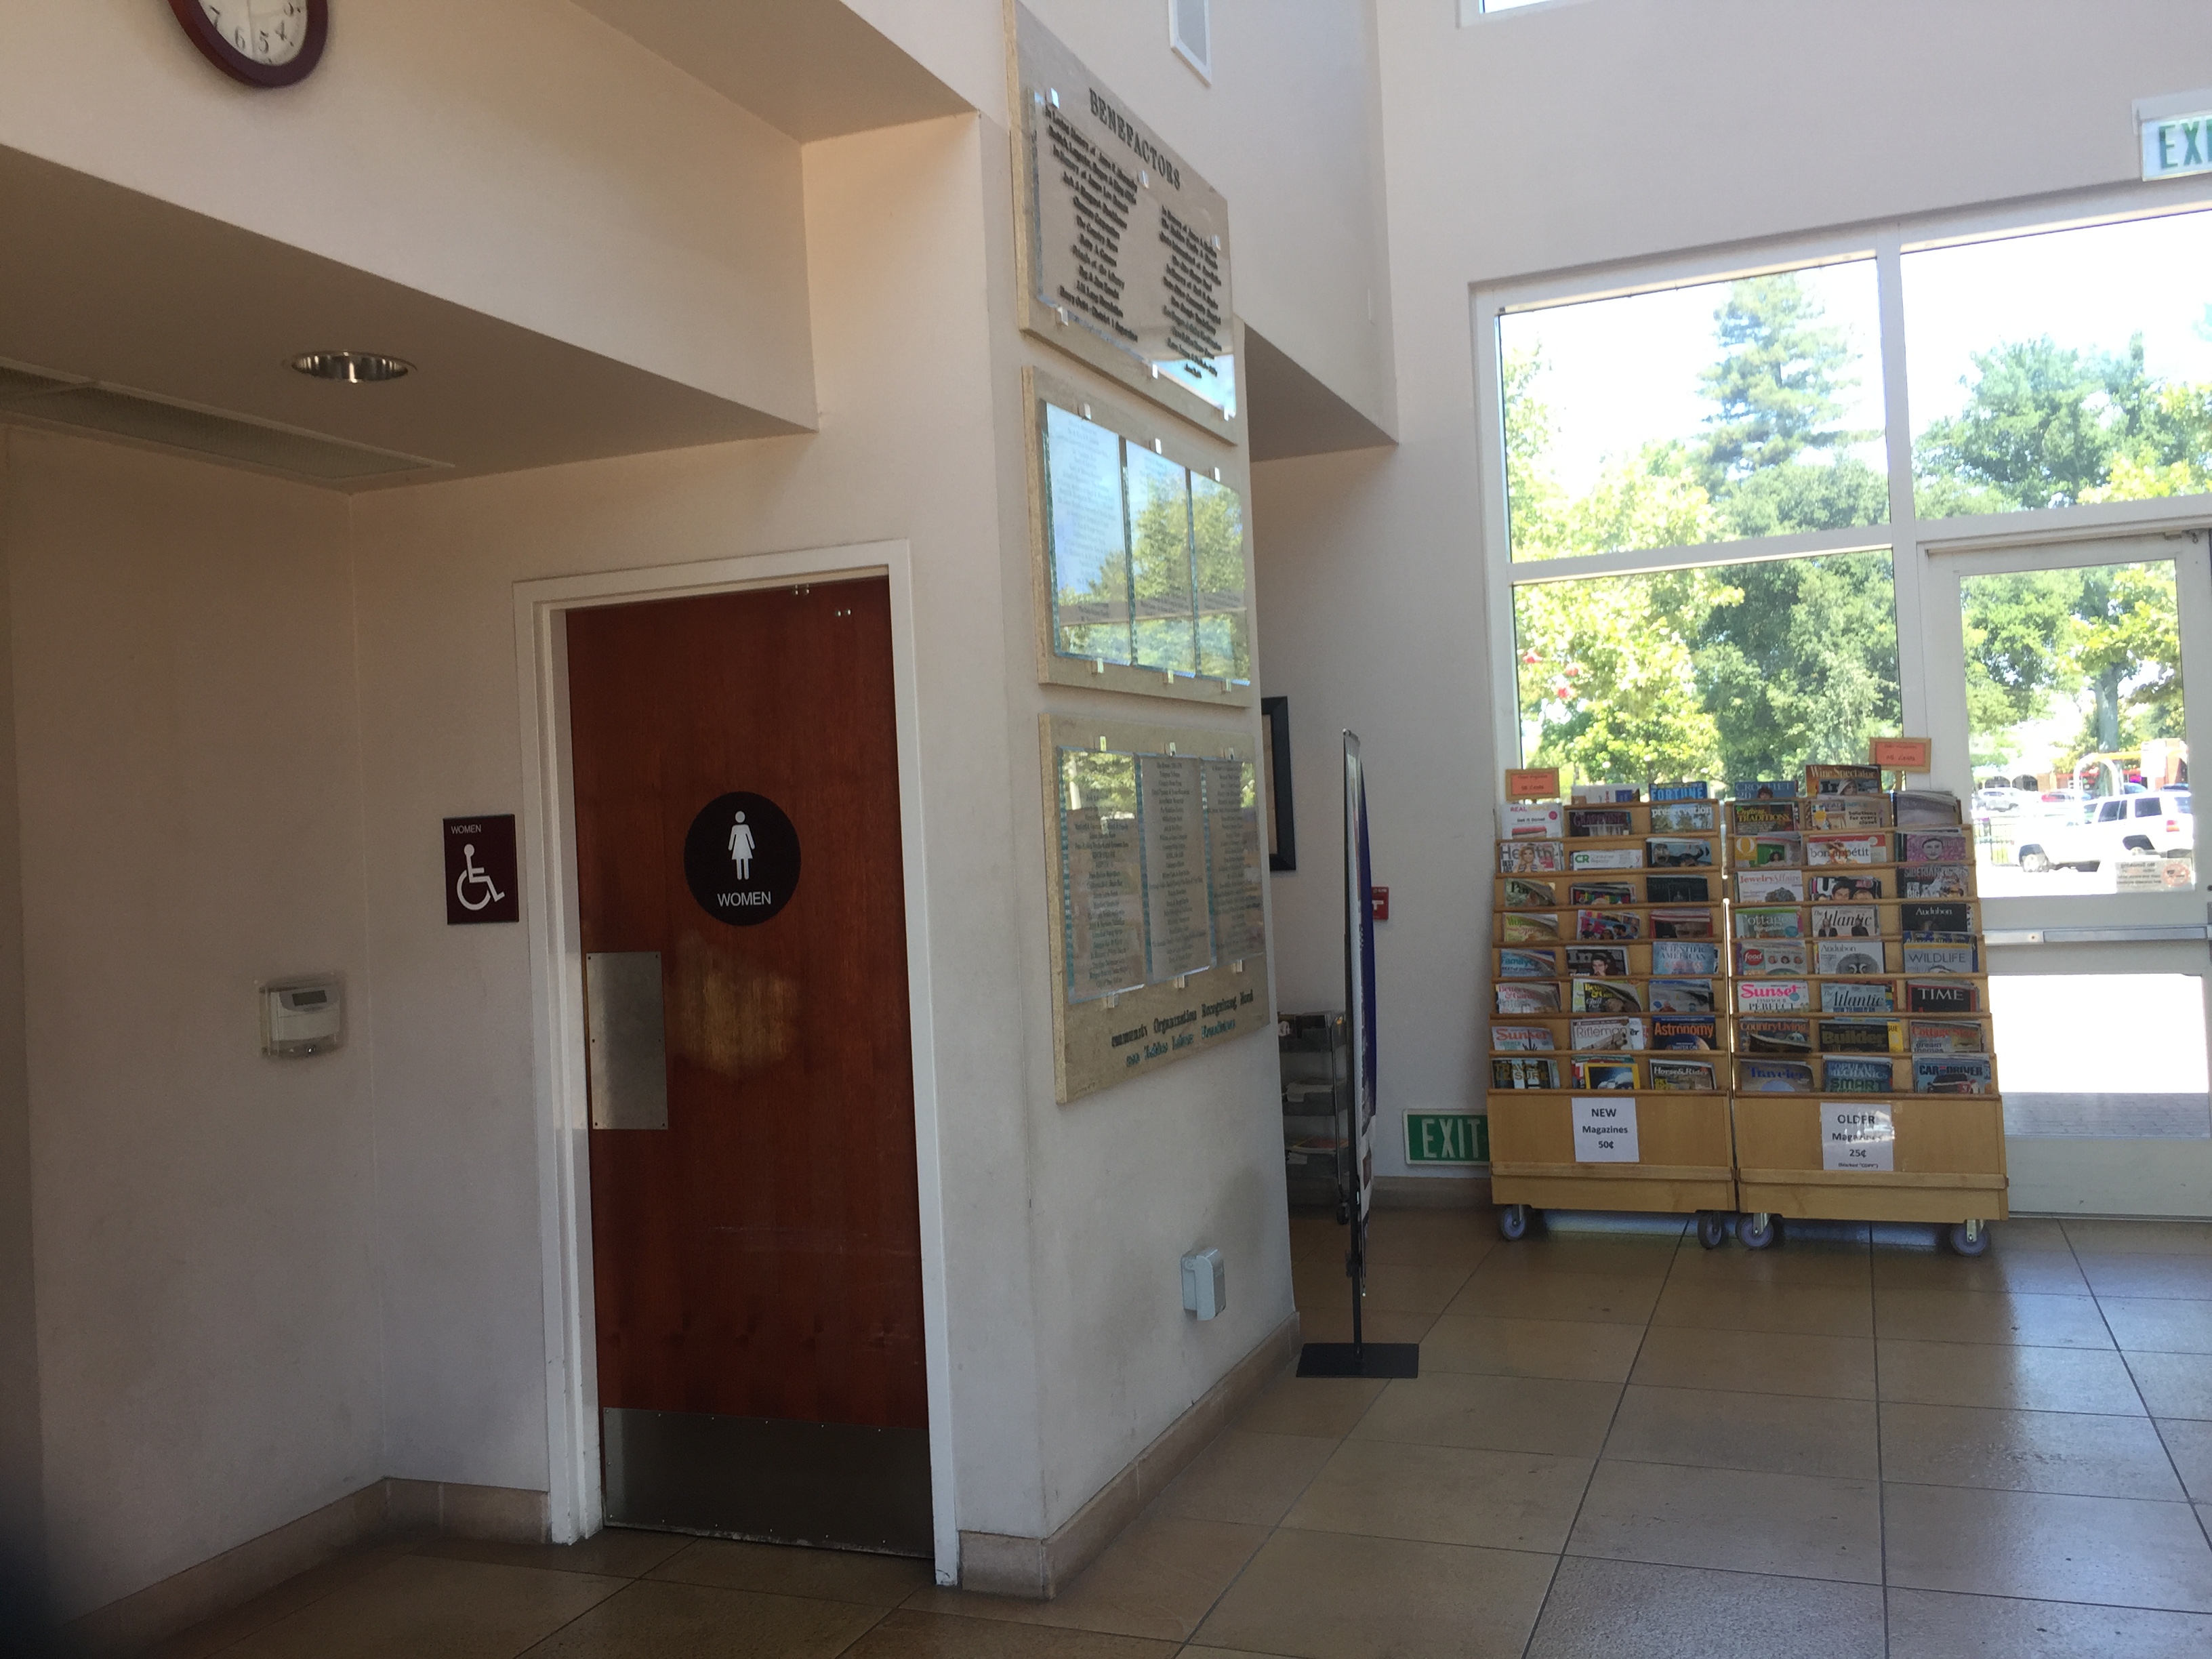 Bathrooms inside the library/cit hall building in Downtown Paso Robles California